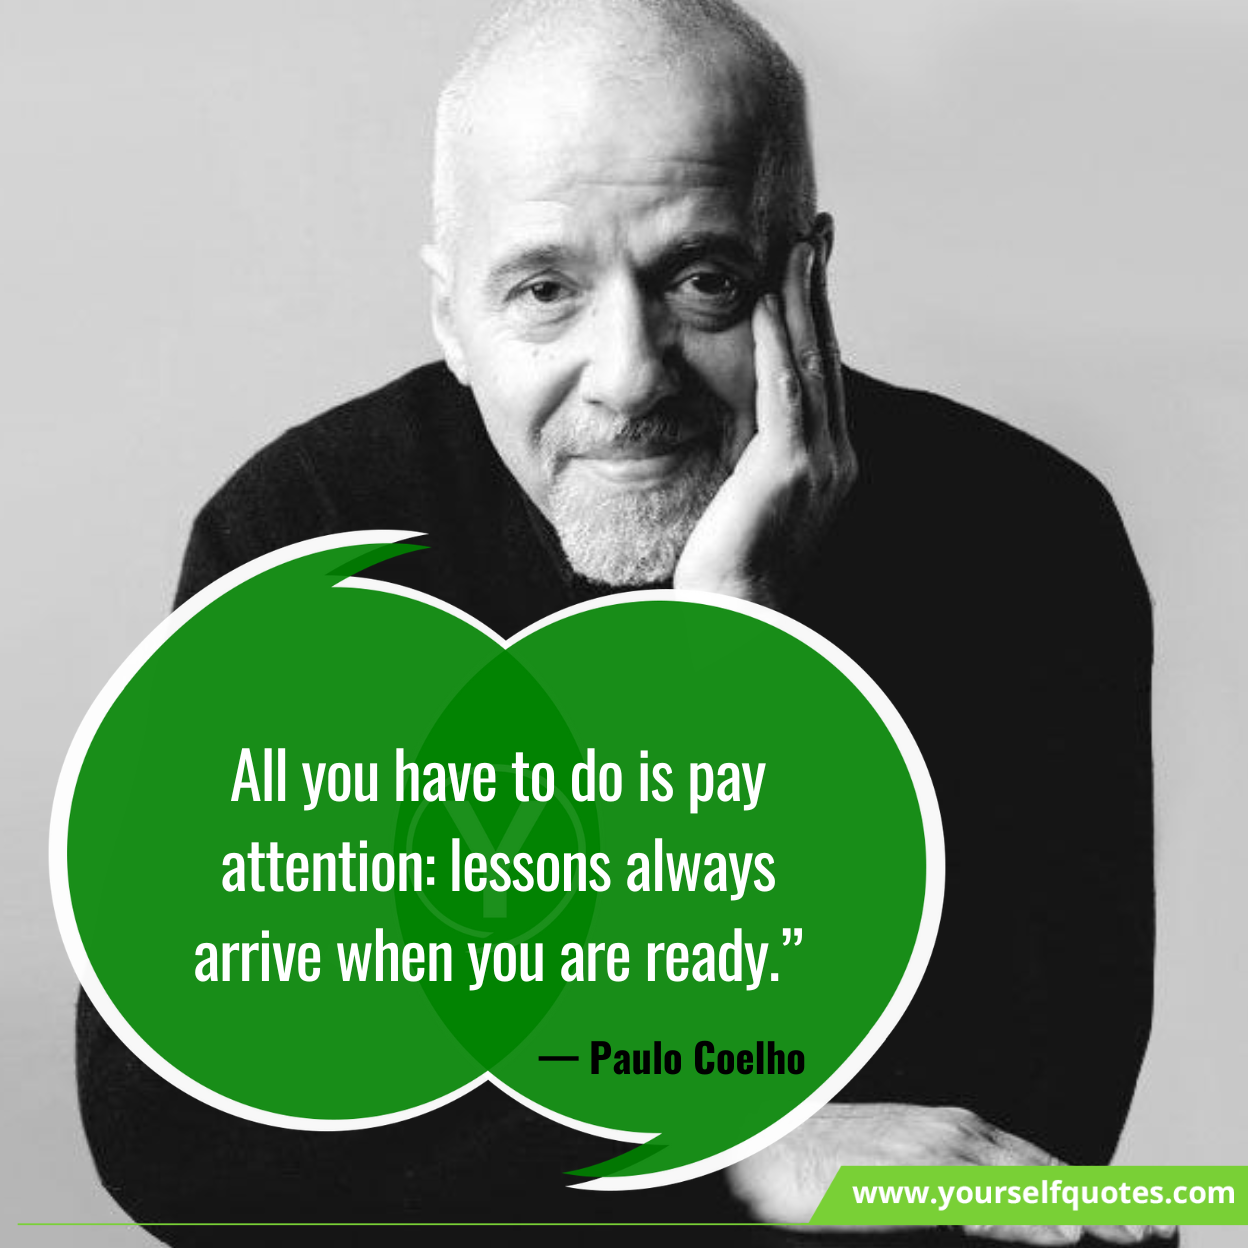 Paulo Coelho Quotes Messages For Freedom